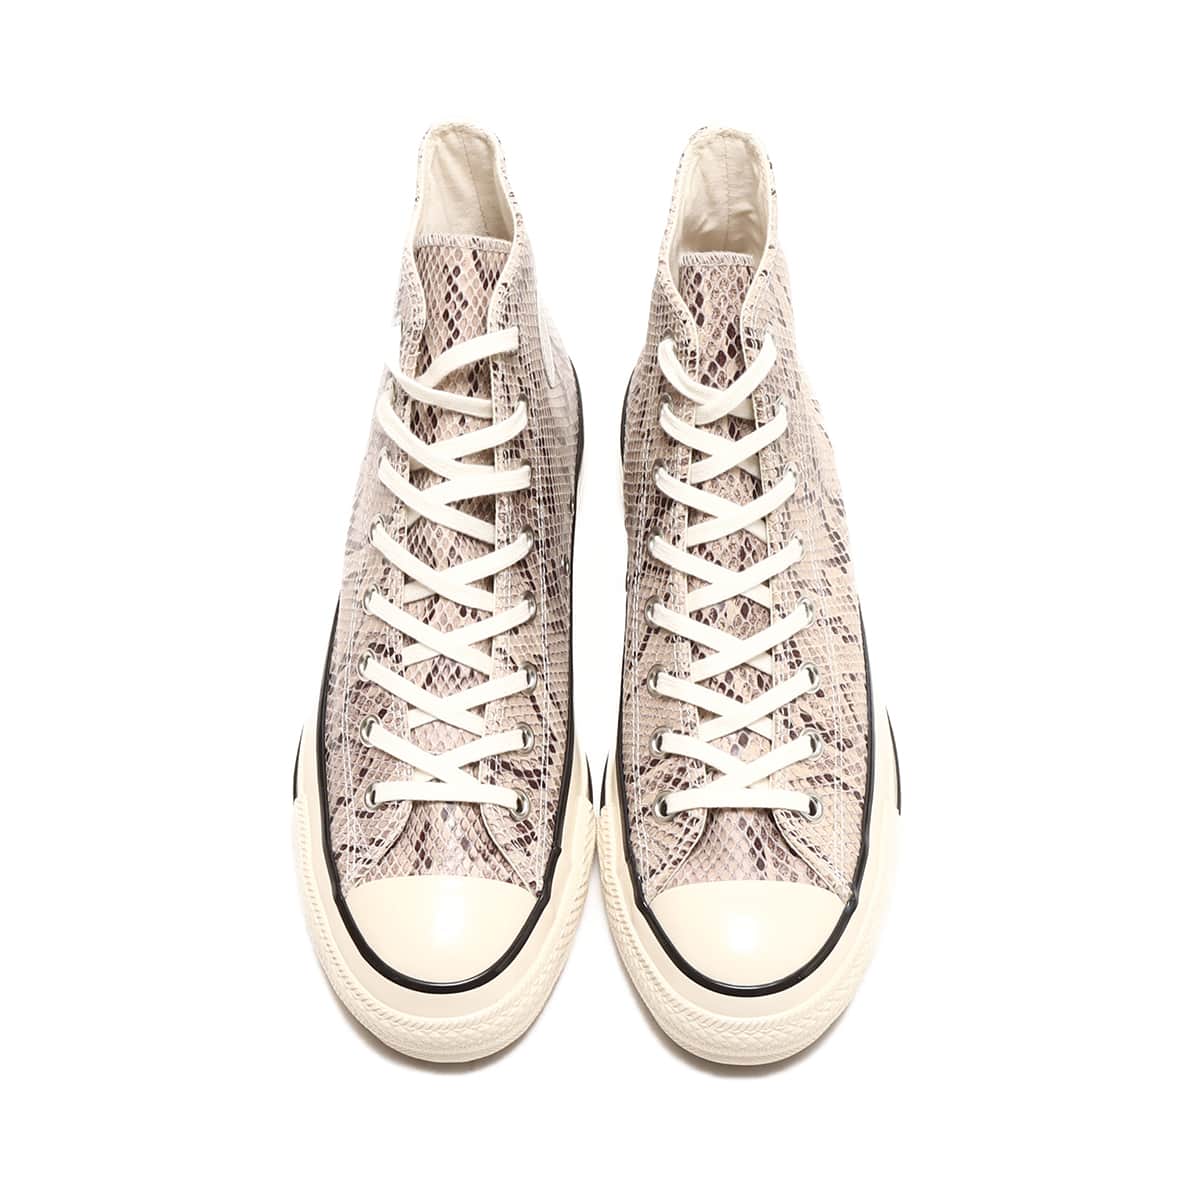 CONVERSE LEATHER ALL STAR US PYTHON HI NATURAL 23SS-I